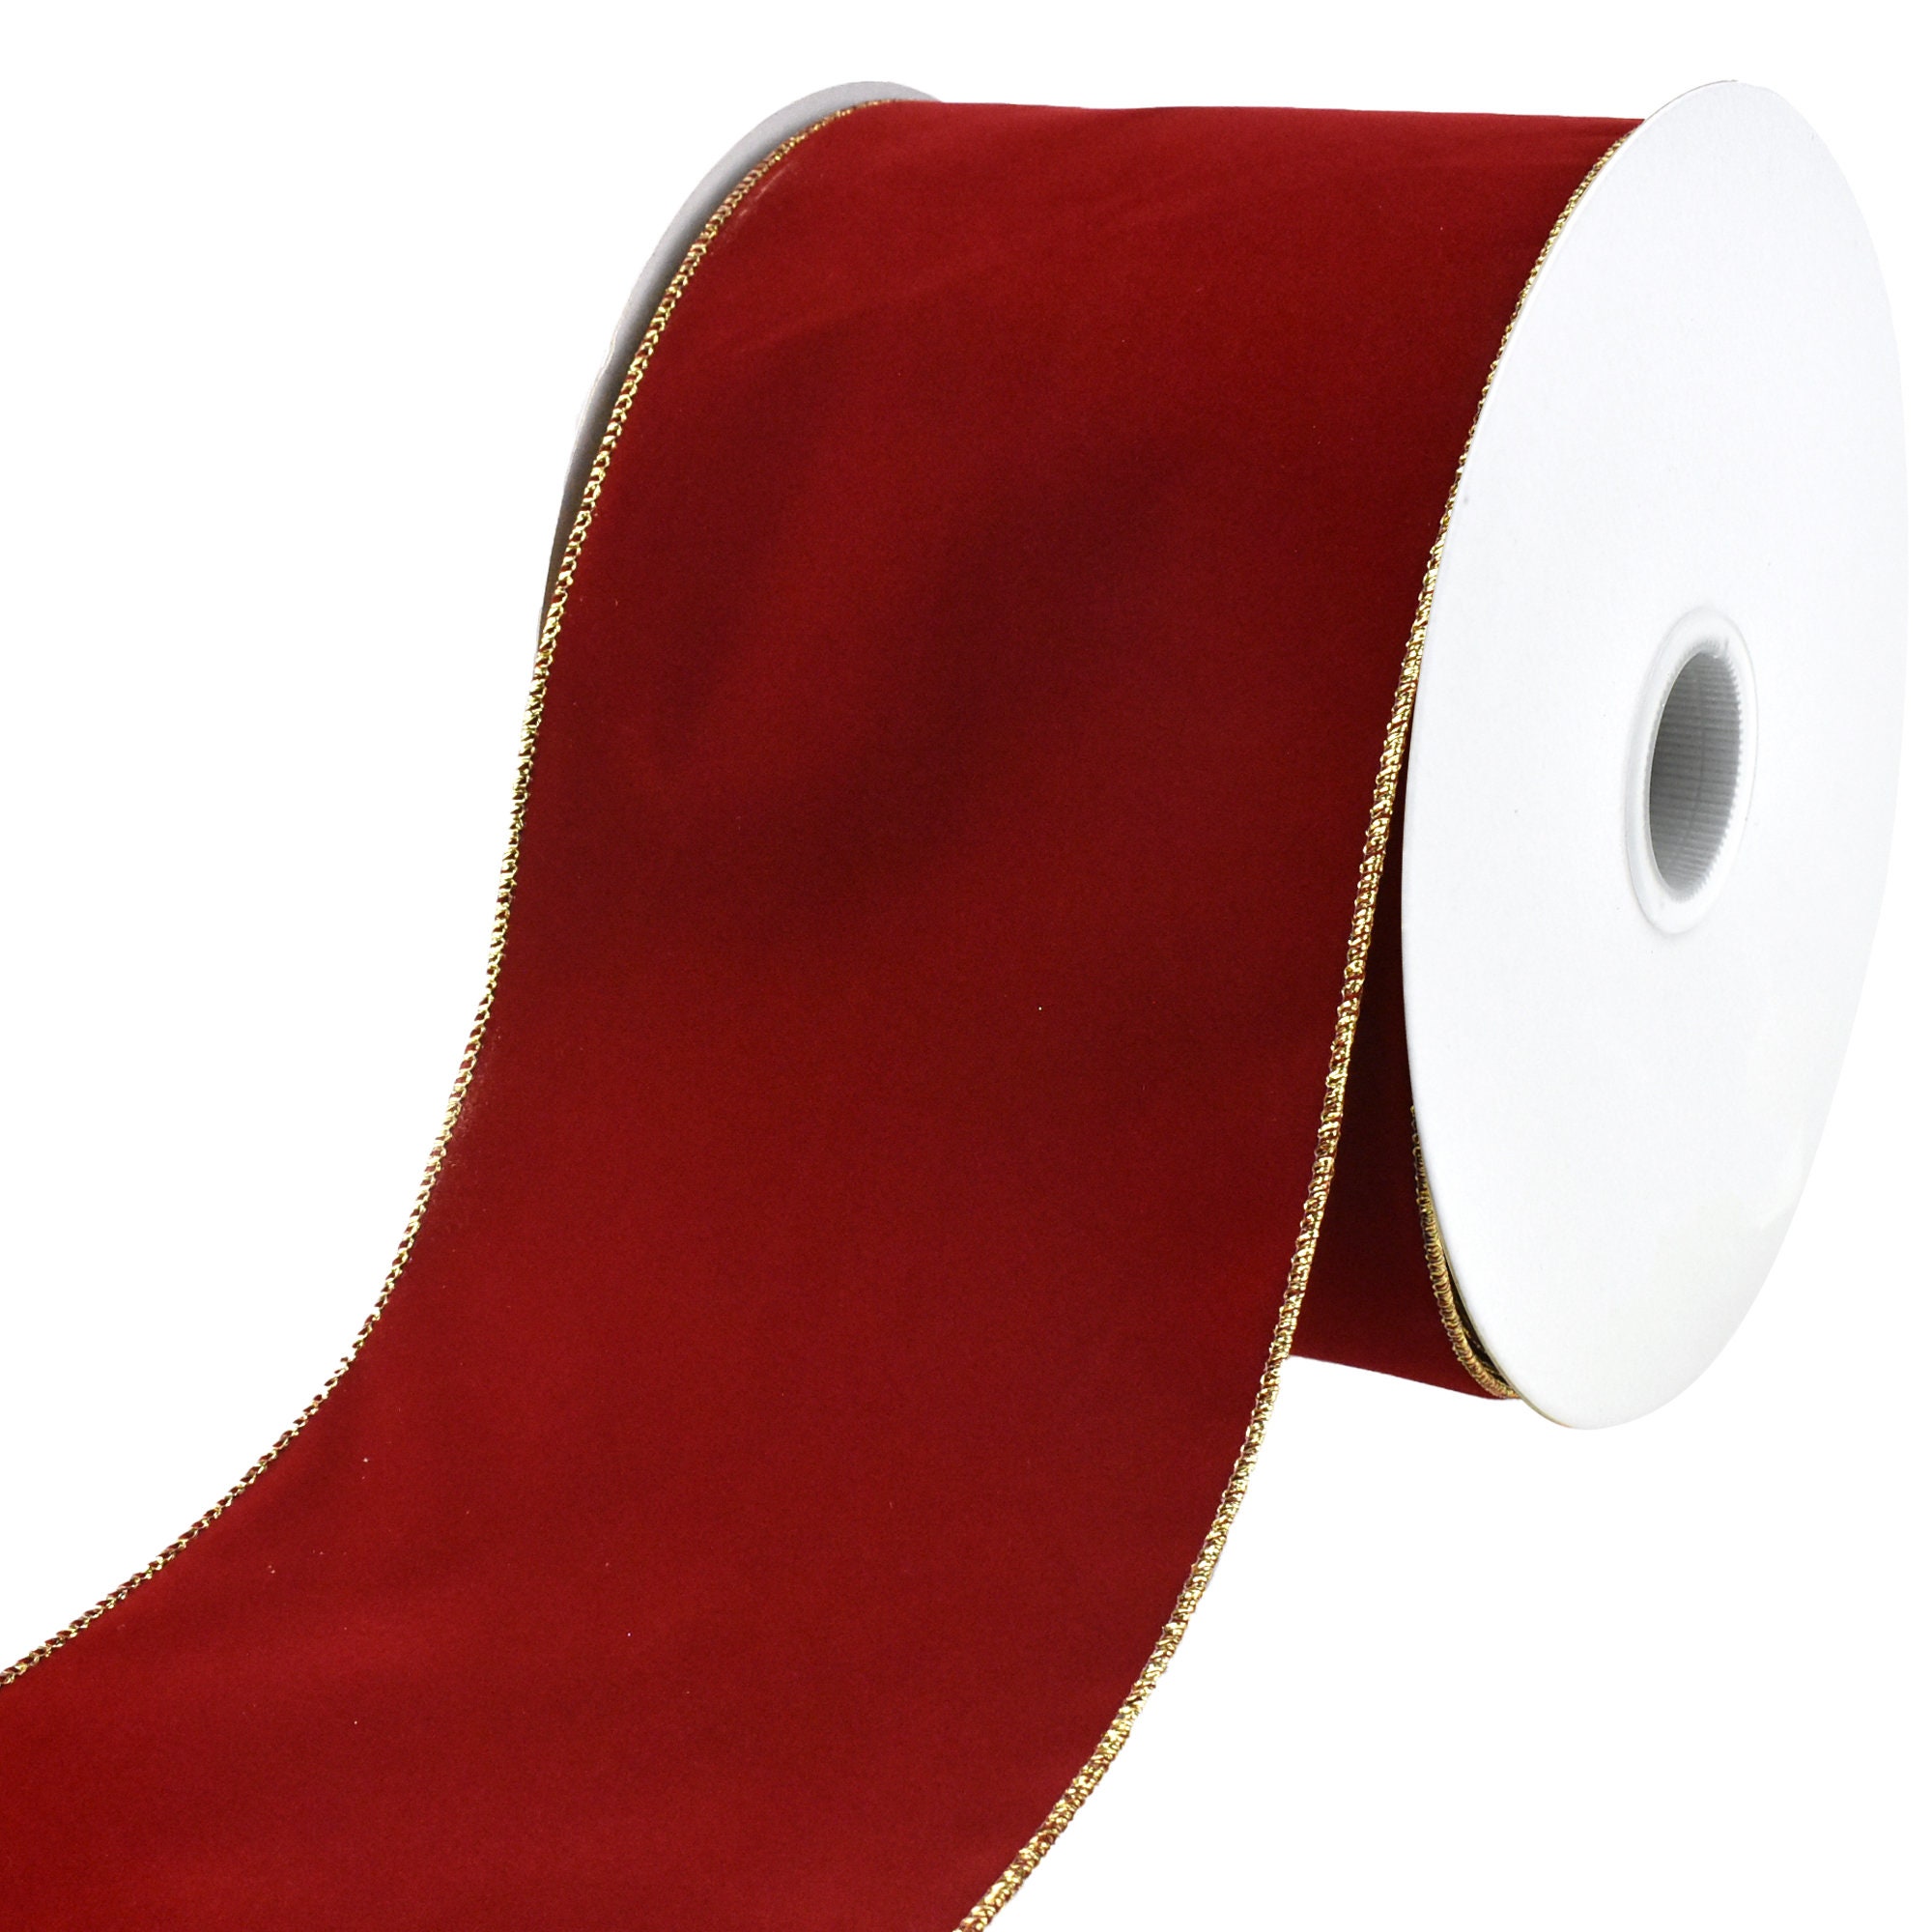 Christmas Velvet Ribbon Wired Edge, Red with Gold Edge, 2-1/2-Inch, 50-Yard